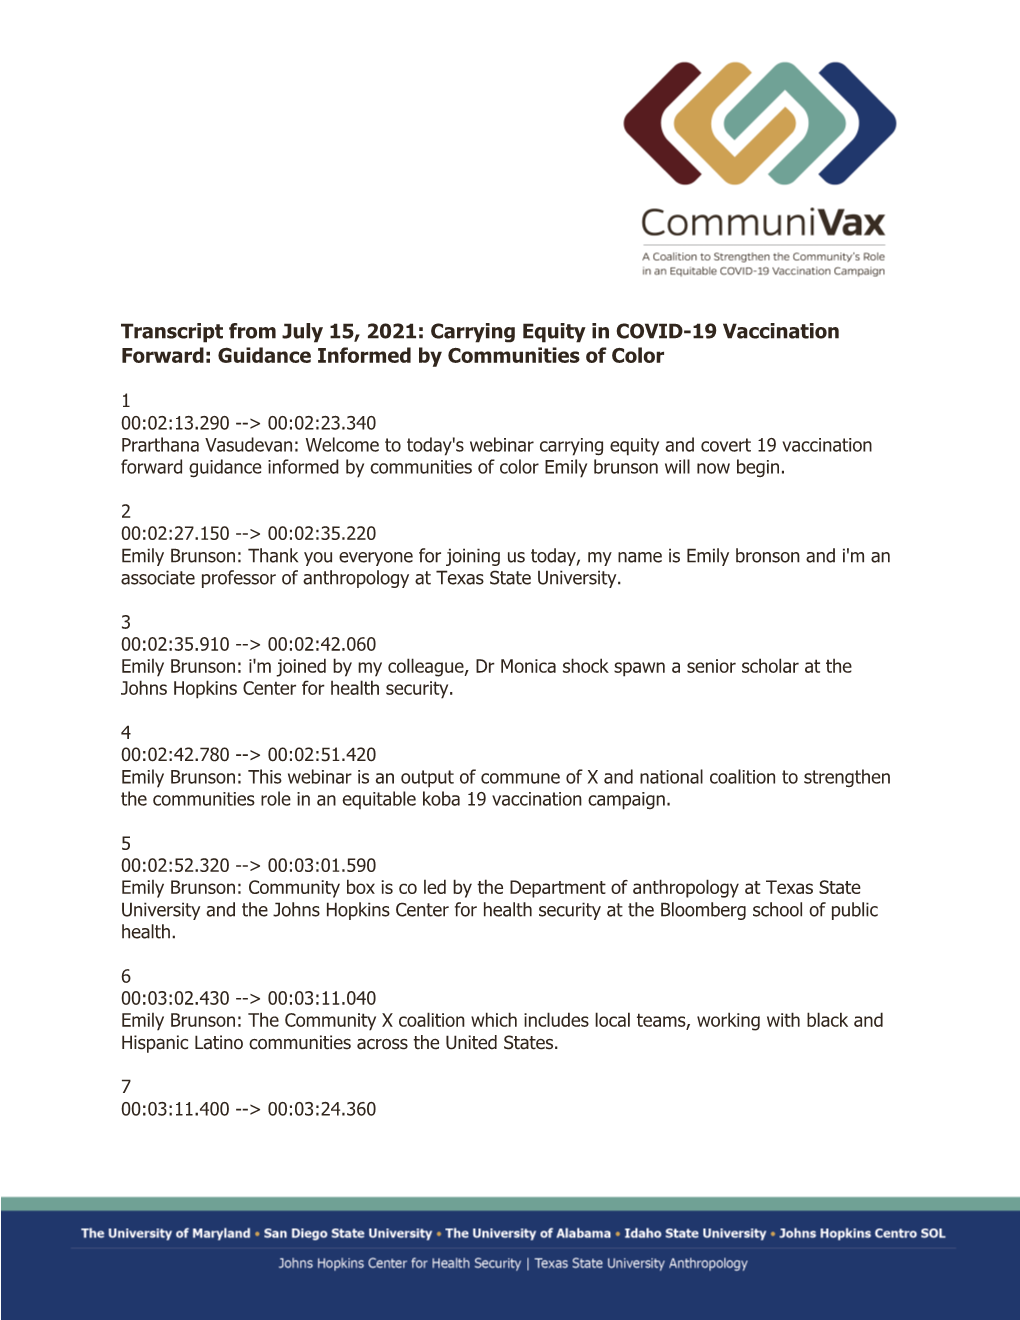 Transcript from July 15, 2021: Carrying Equity in COVID-19 Vaccination Forward: Guidance Informed by Communities of Color